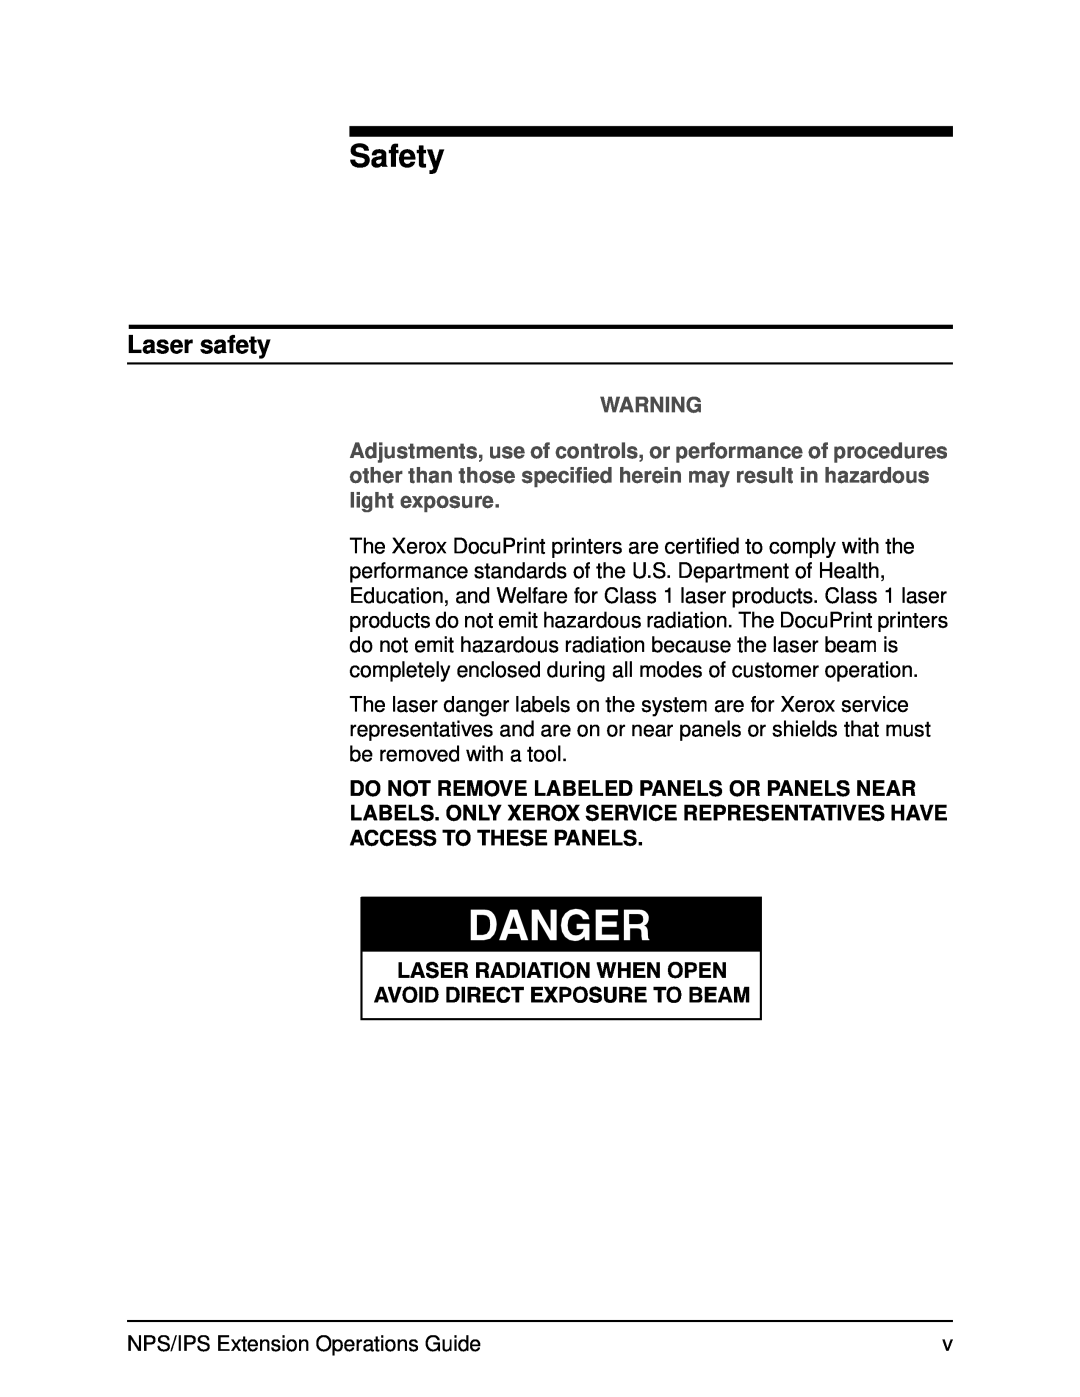 Xerox 2000 Series manual Safety, Laser safety 